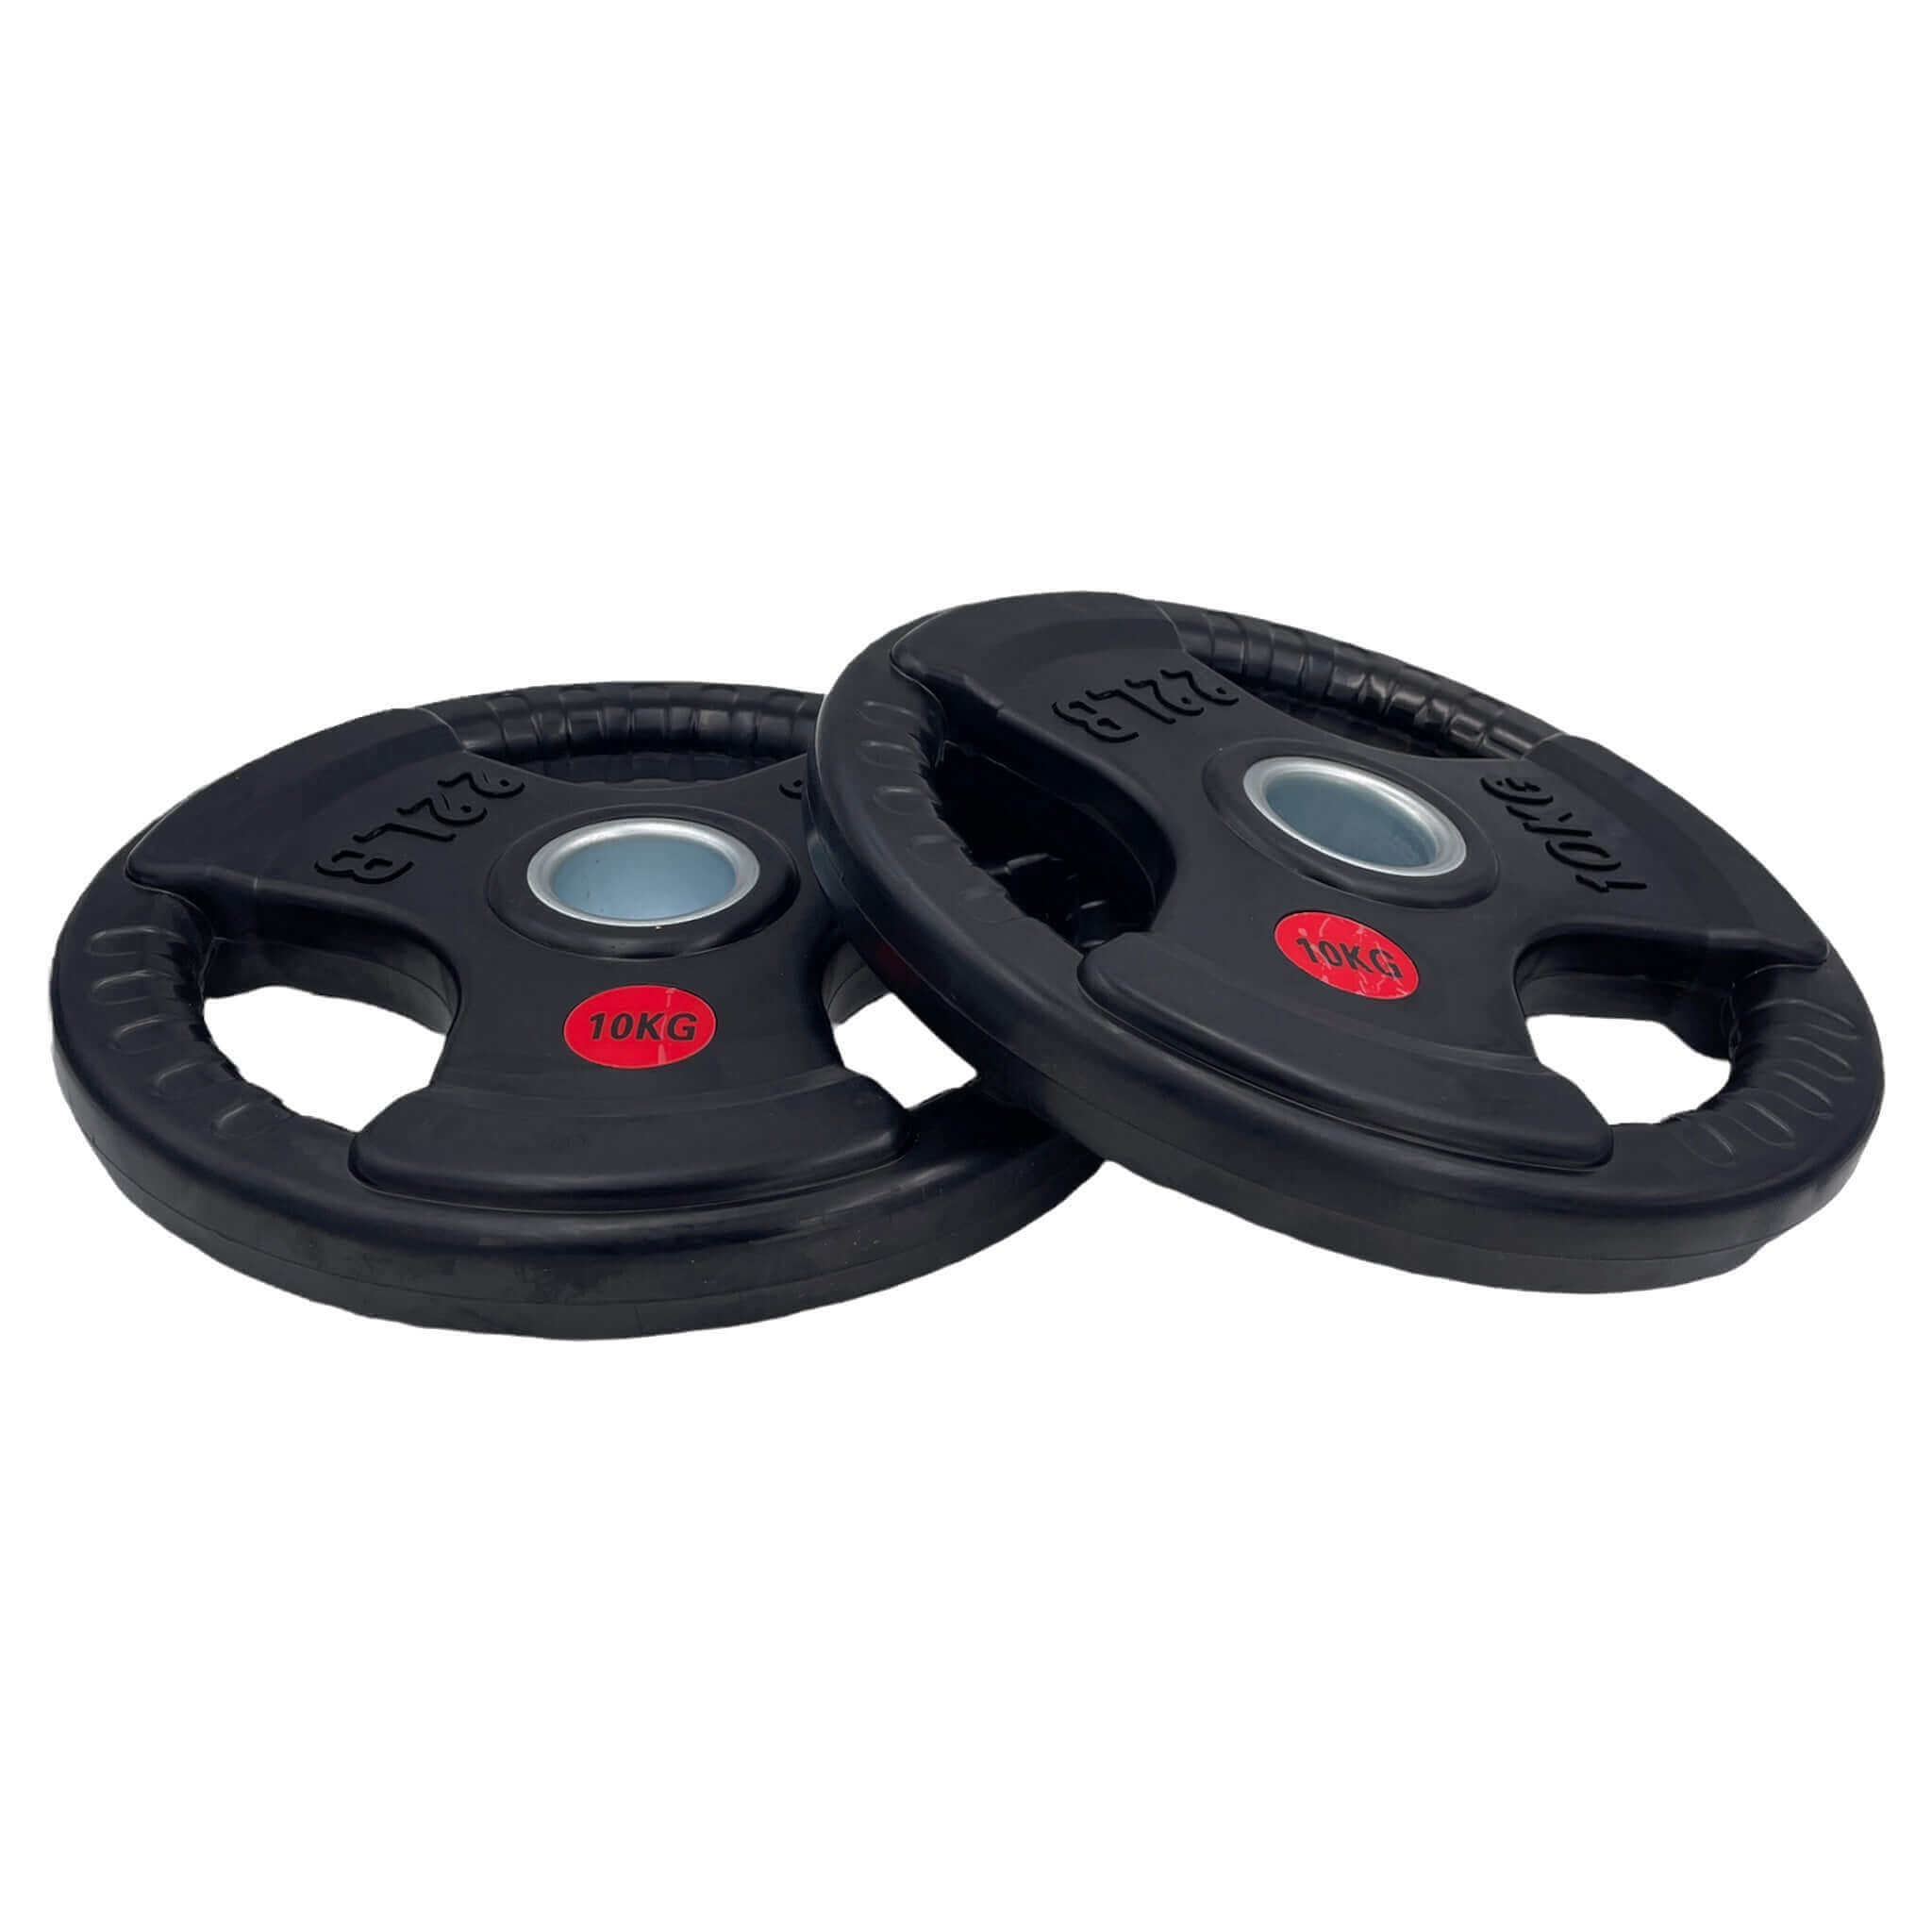 Rubber Coated Type-O Tri-Grip Weight Plates 70kg Bundle | Tri Grip Rubber Plates | INSOURCE